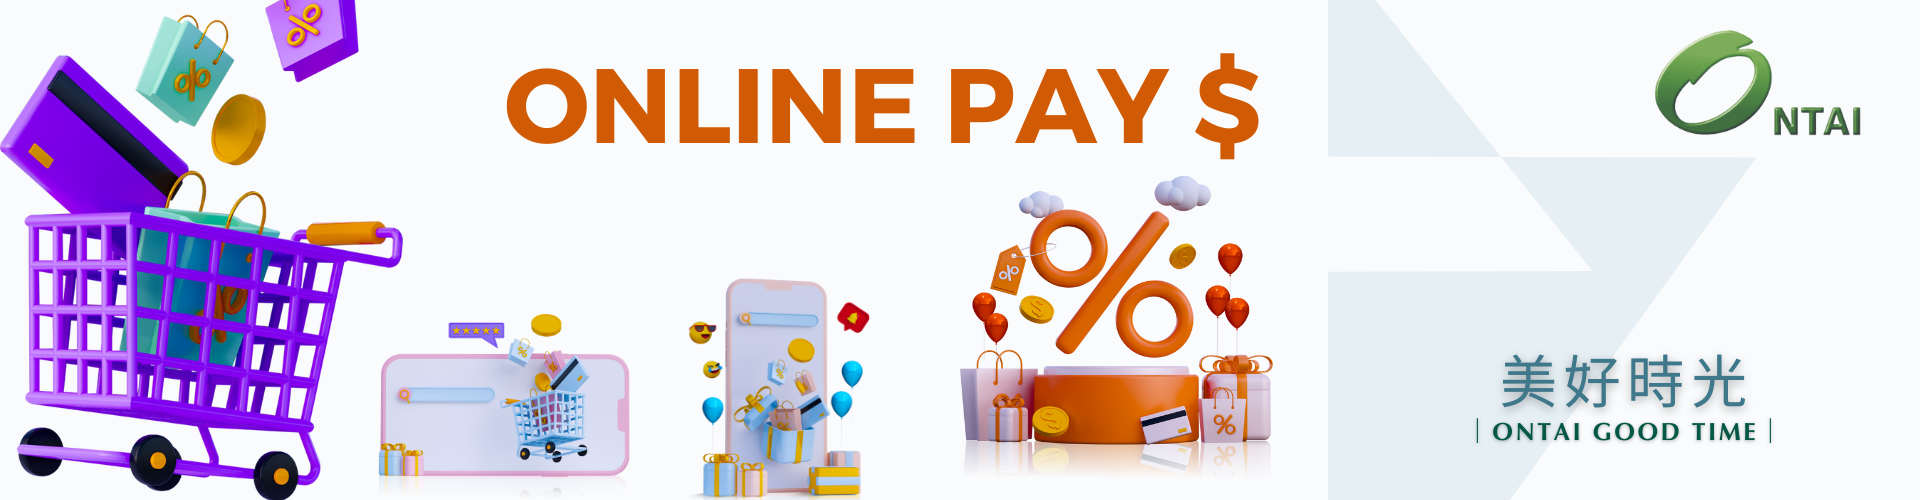 line pay付款專區banner0529